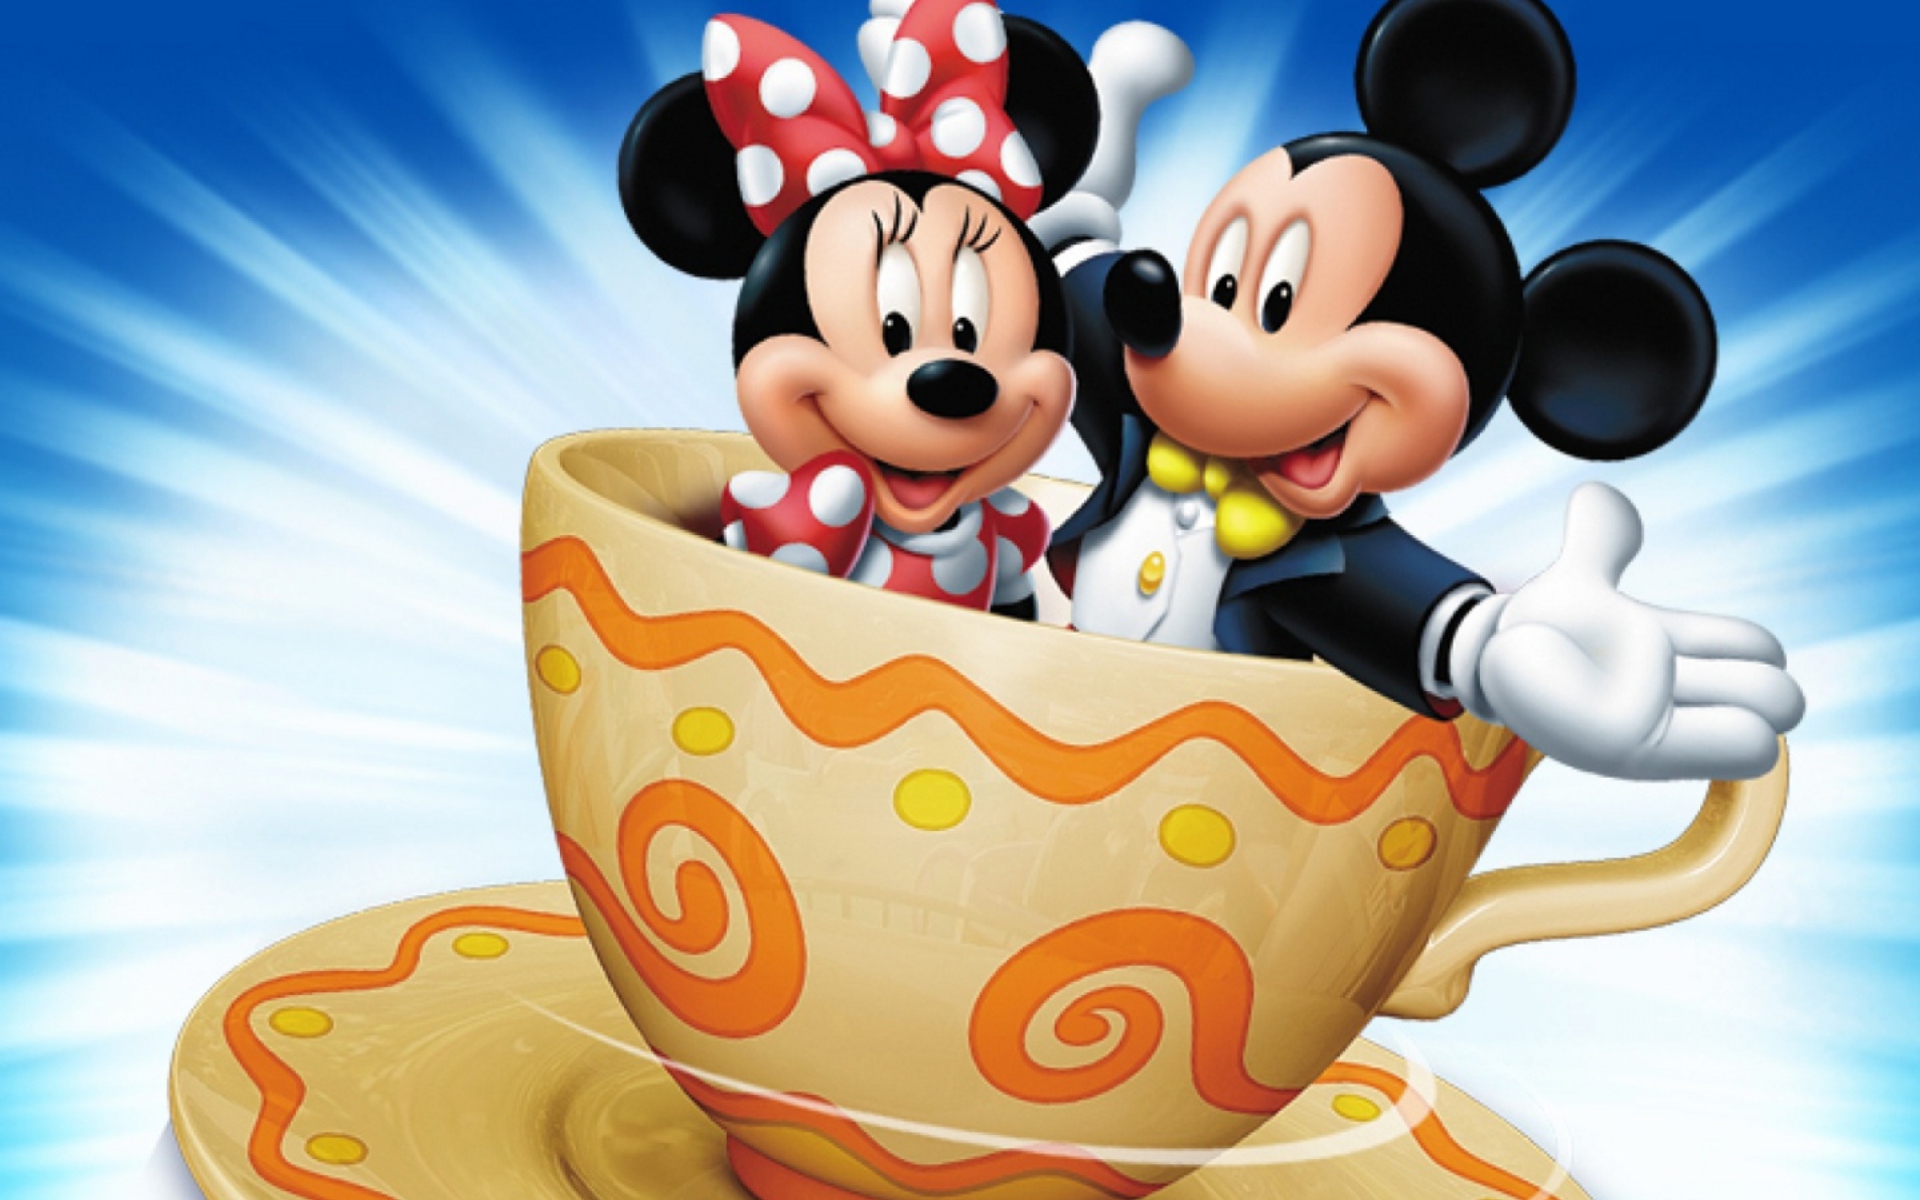 Mickey And Minnie Mouse In Cup wallpaper 1920x1200